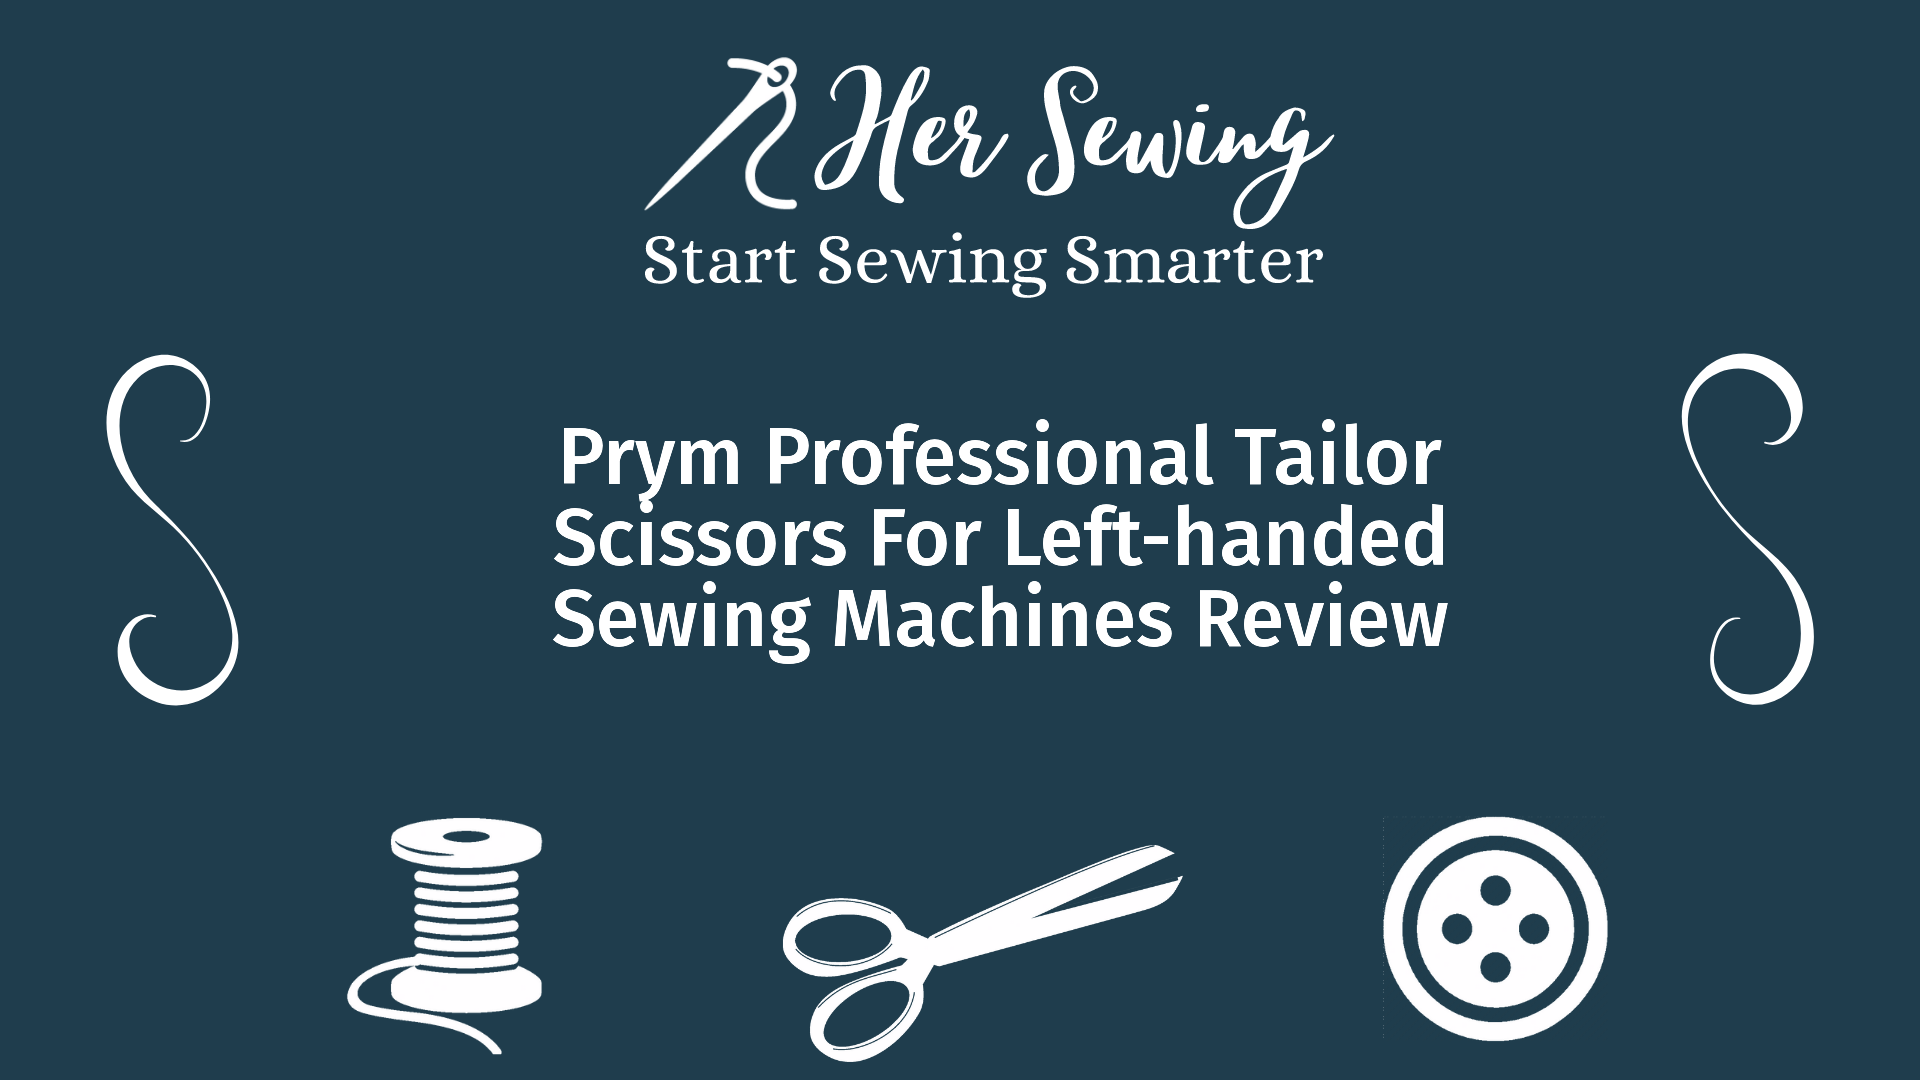 Prym Professional Tailor Scissors For Left-handed Sewing Machines Review